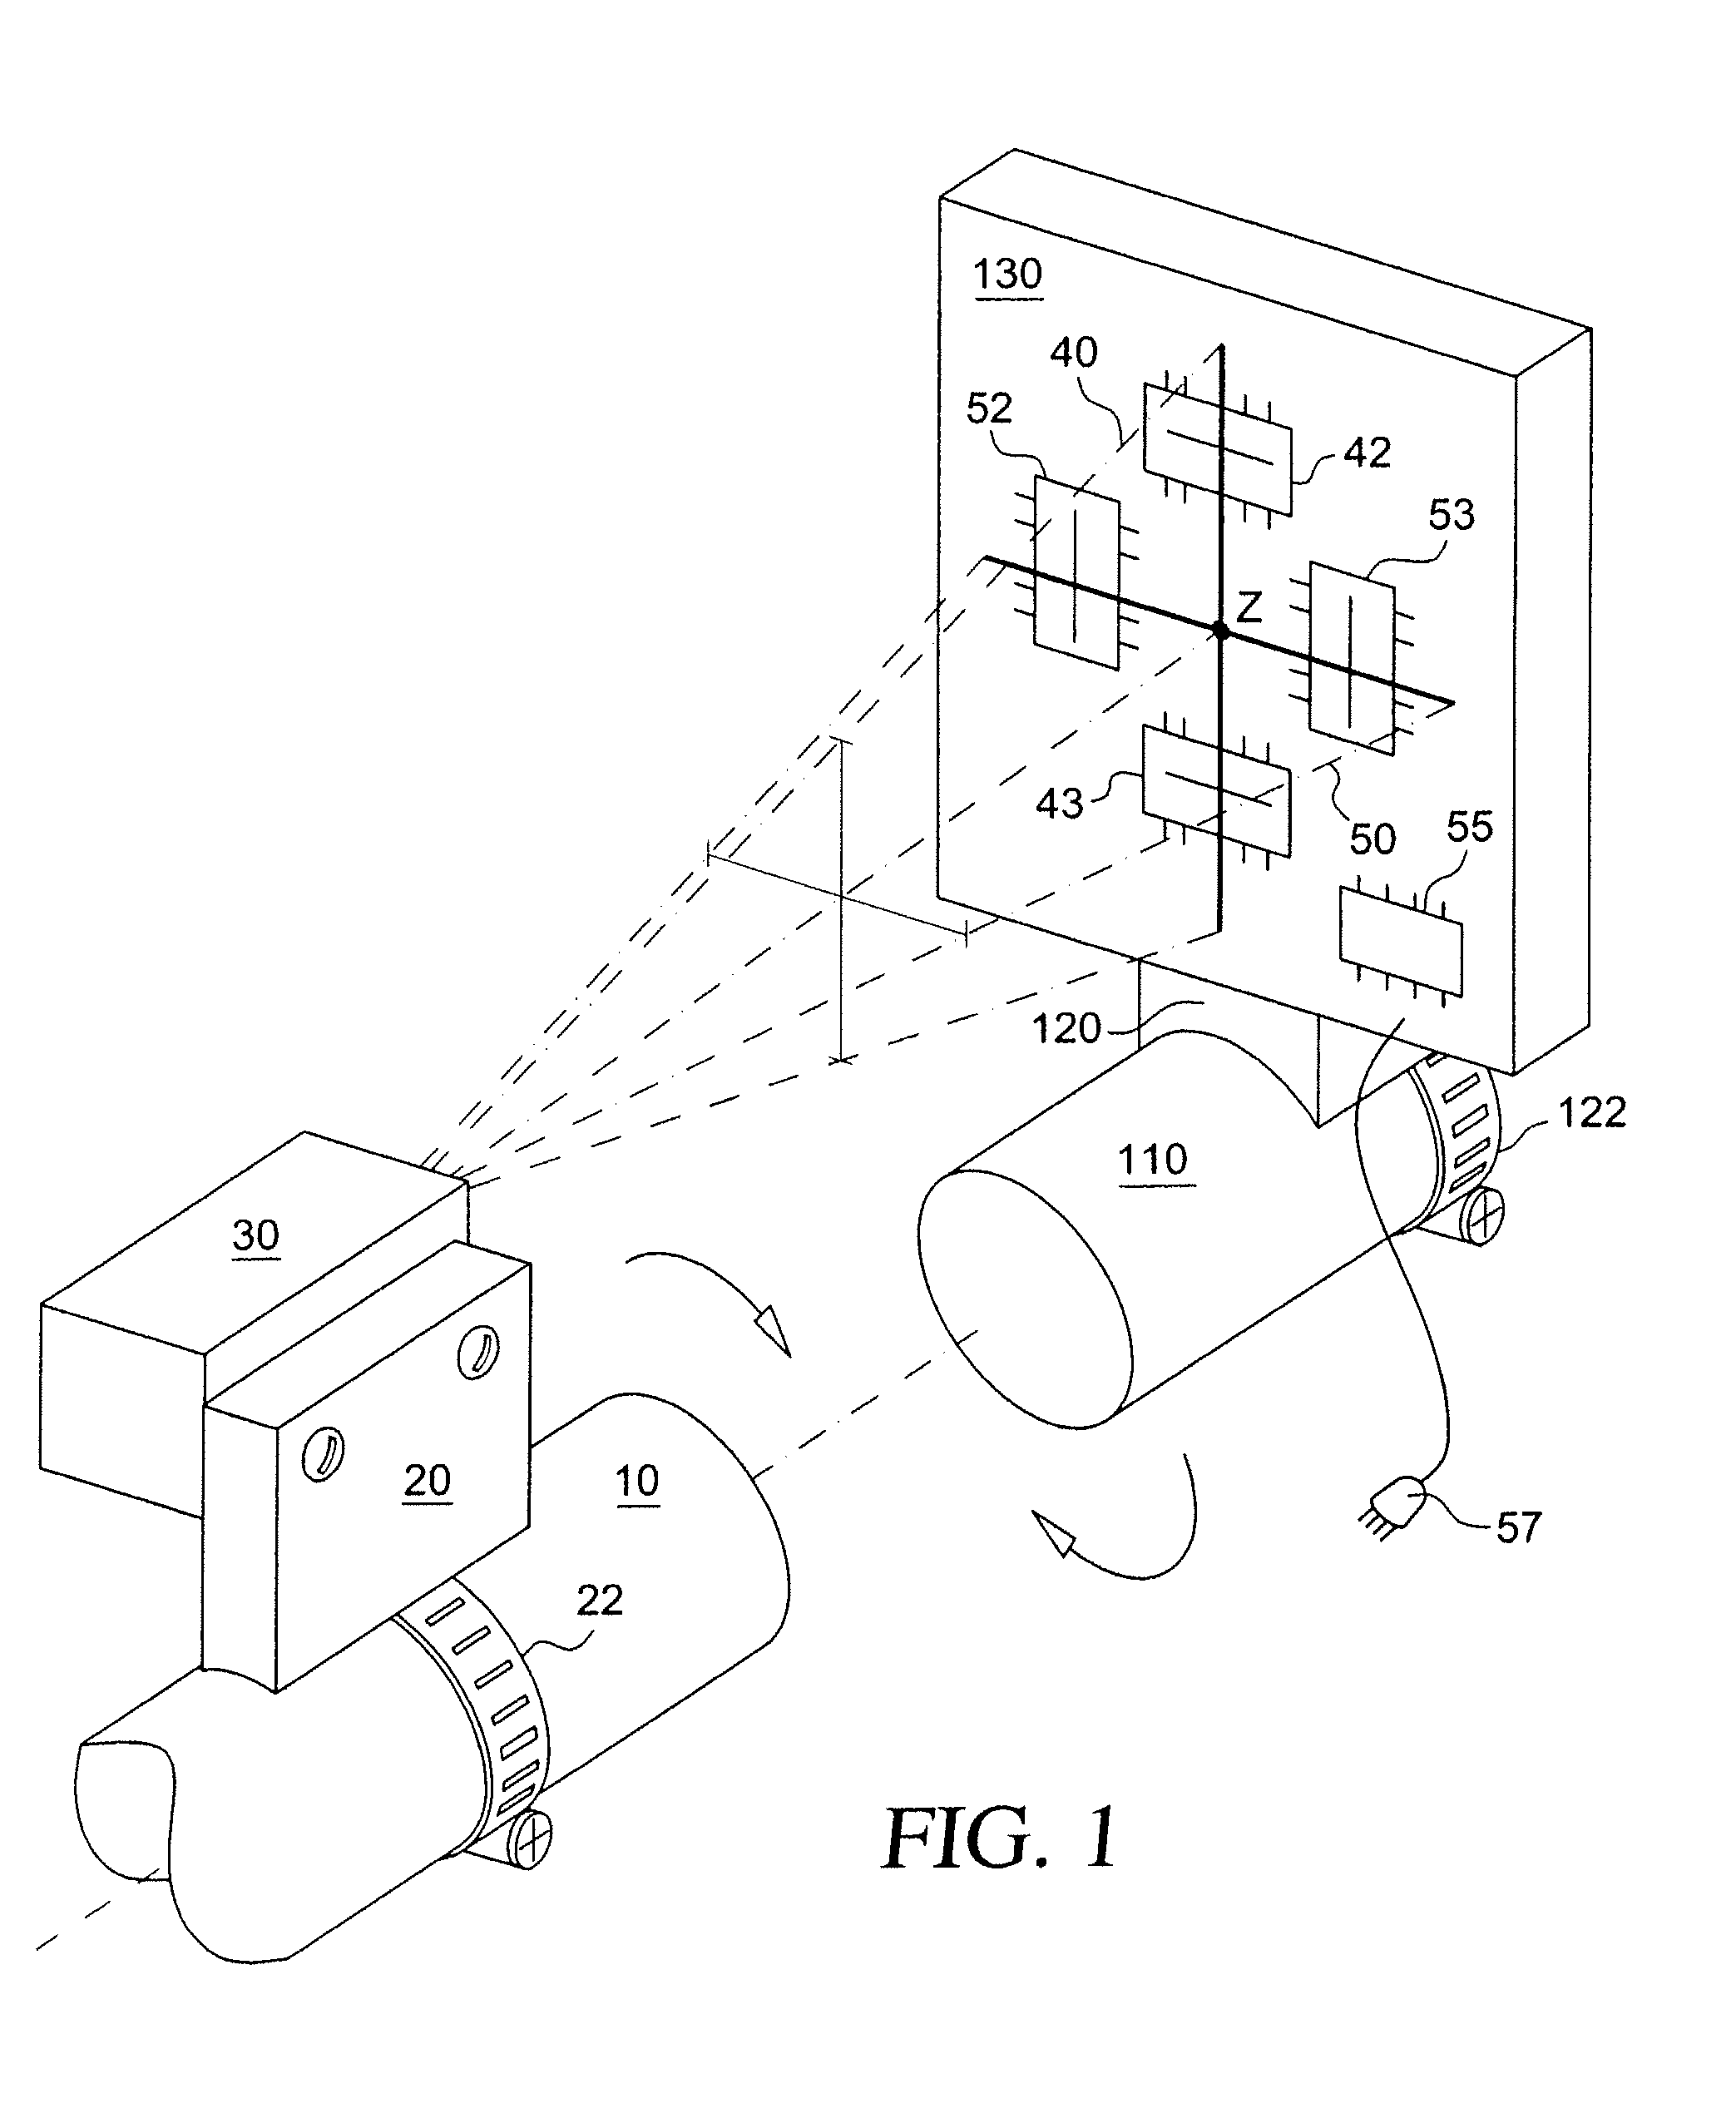 Device and process for quantitative assessment of the three-dimensional position of two machine parts, shafts, spindles, workpieces or other articles relative to one another